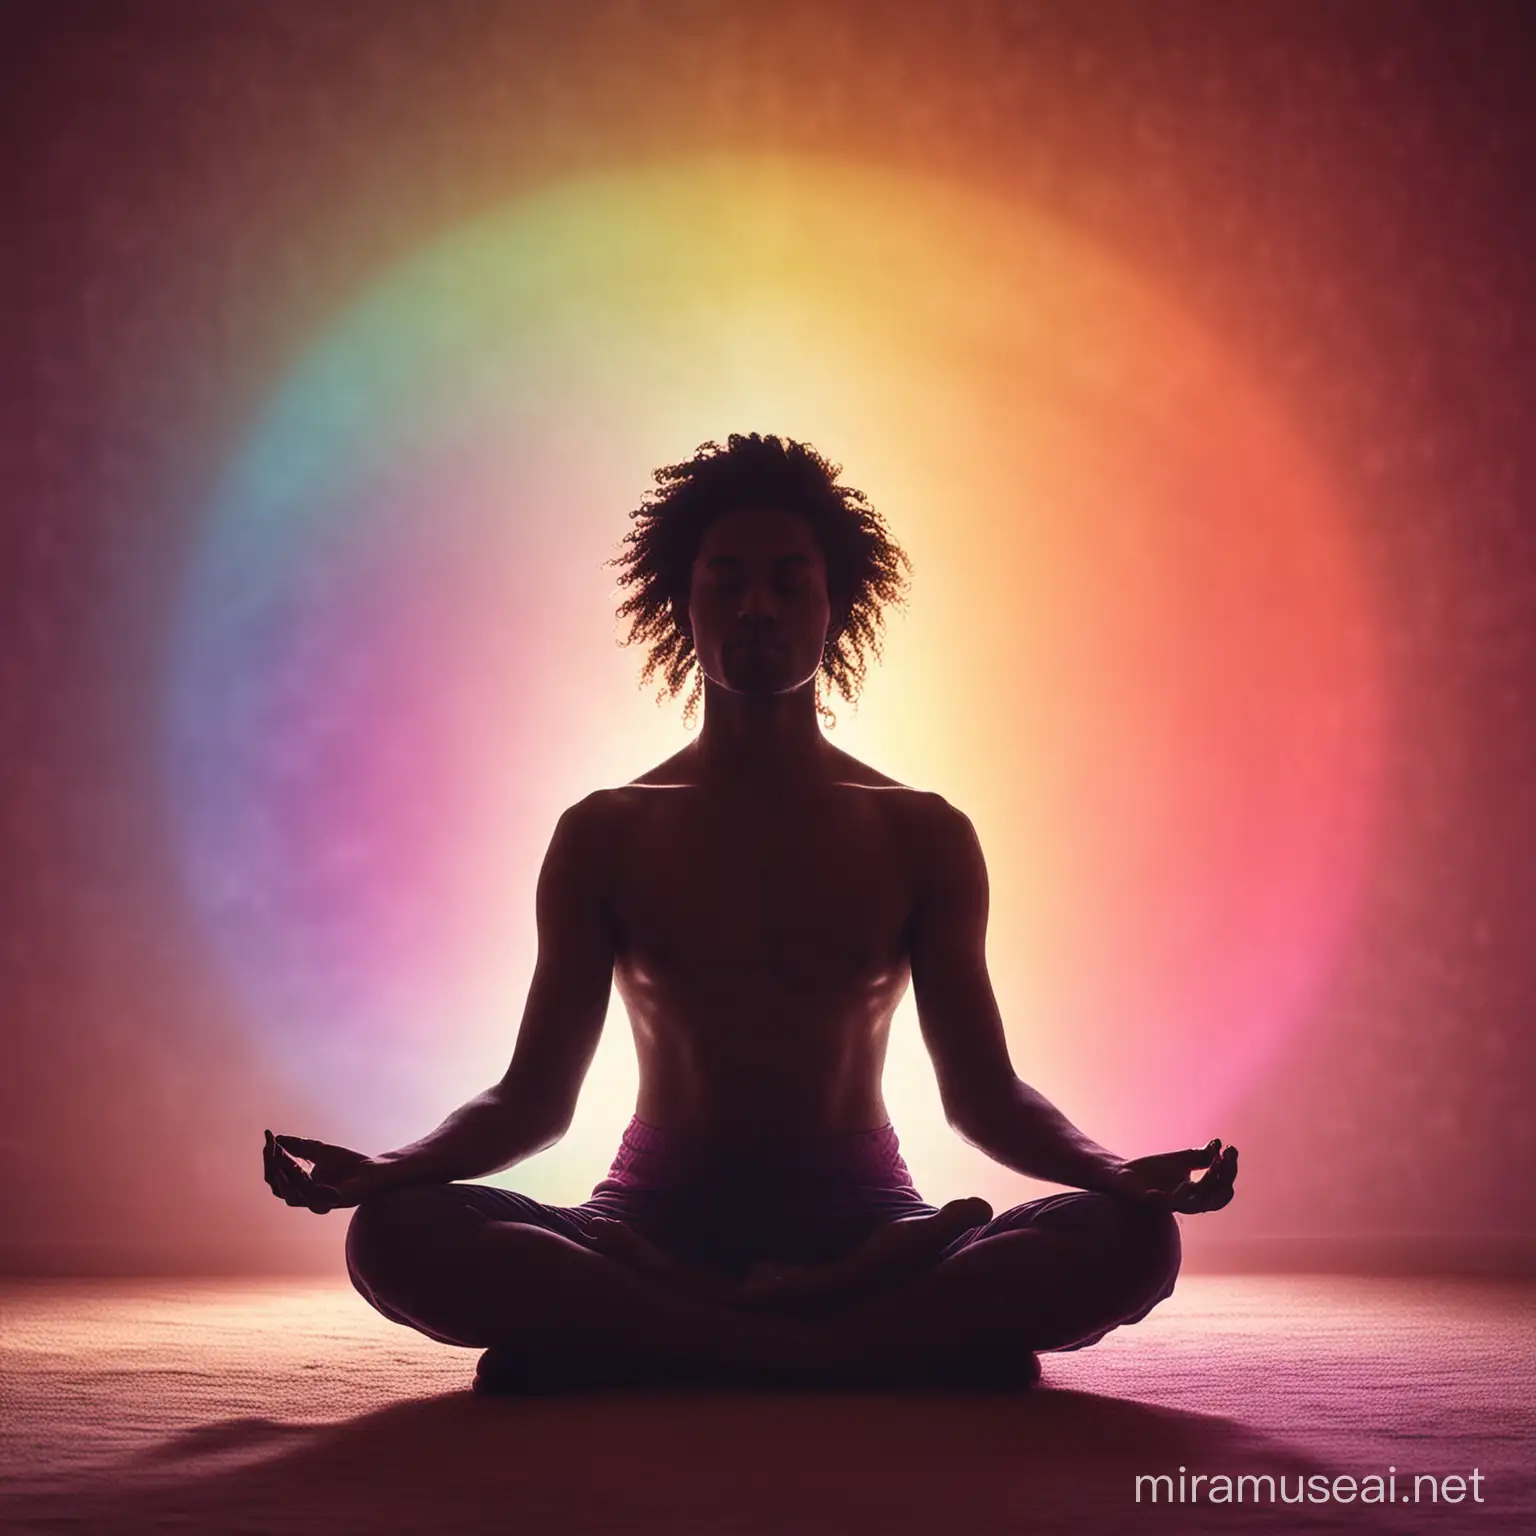 A SILHOUETTE OF A PERSON MEDITATING WITH A COLORFUL AURA IN THE BACKGROUND AND A POSITIVE VIBE